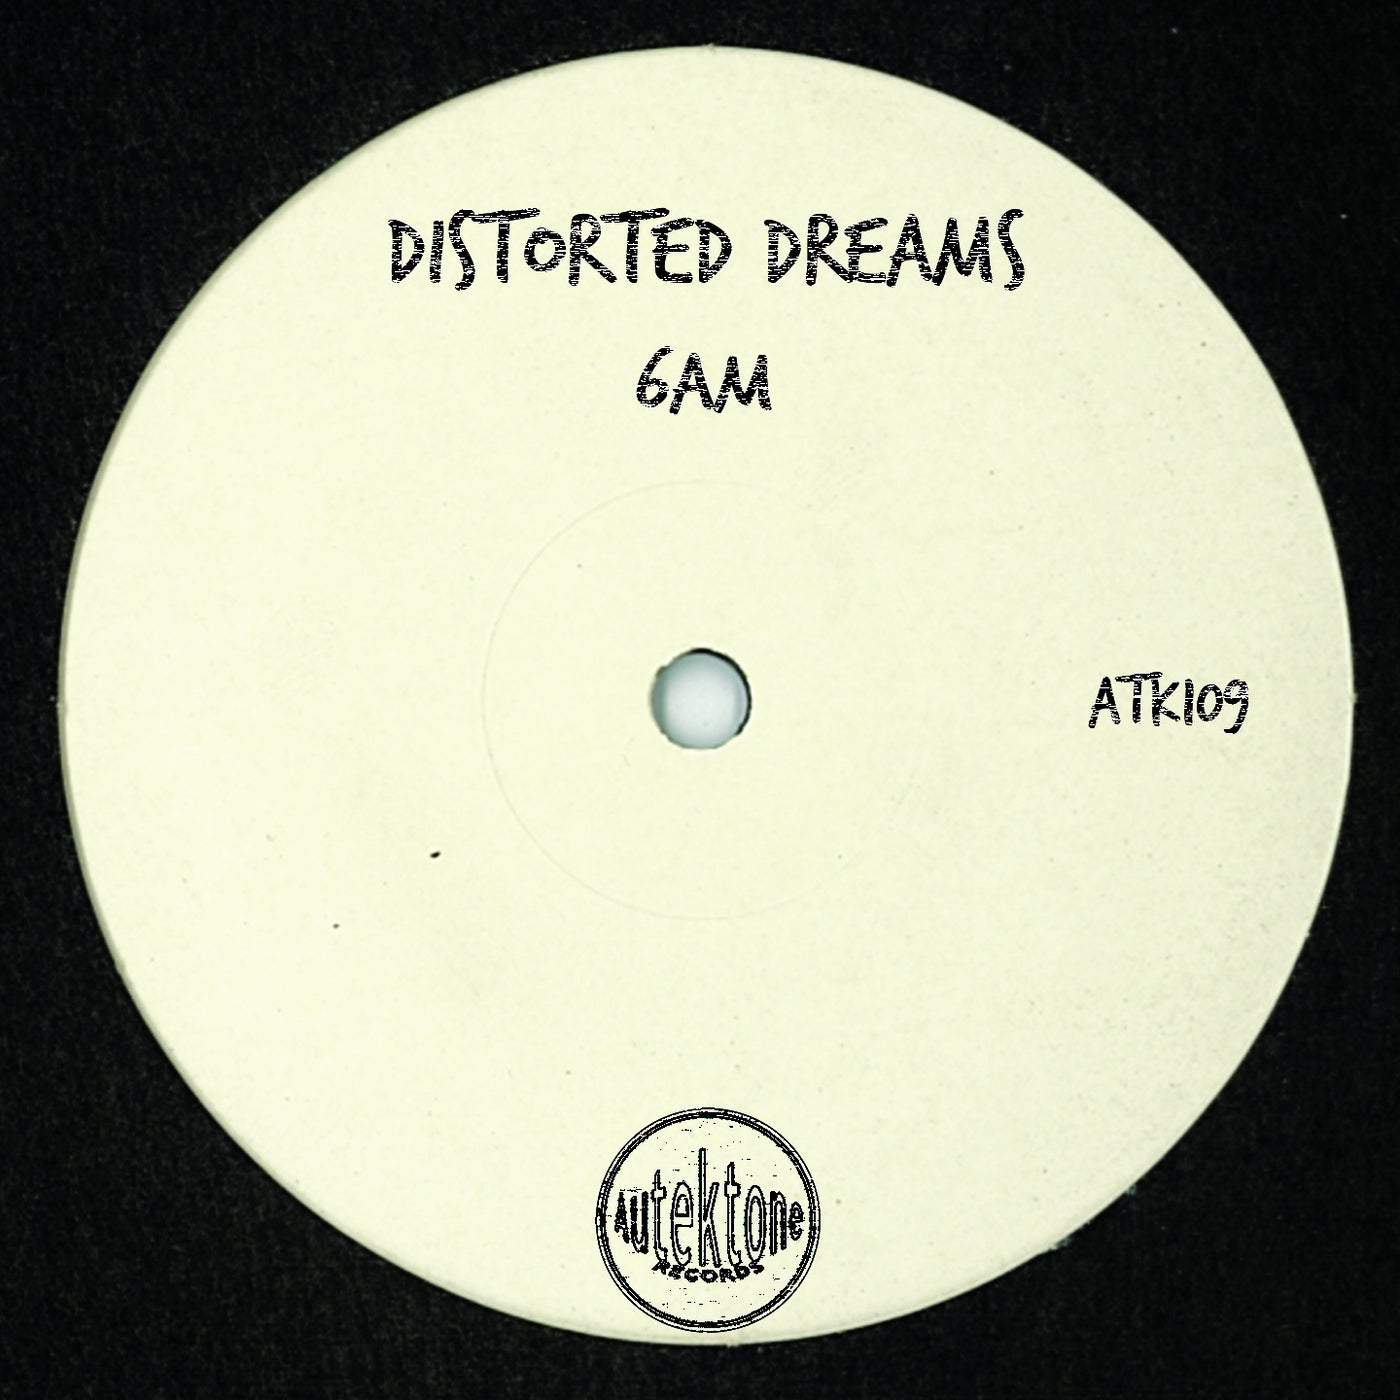 image cover: Distorted Dreams - 6am / ATK109